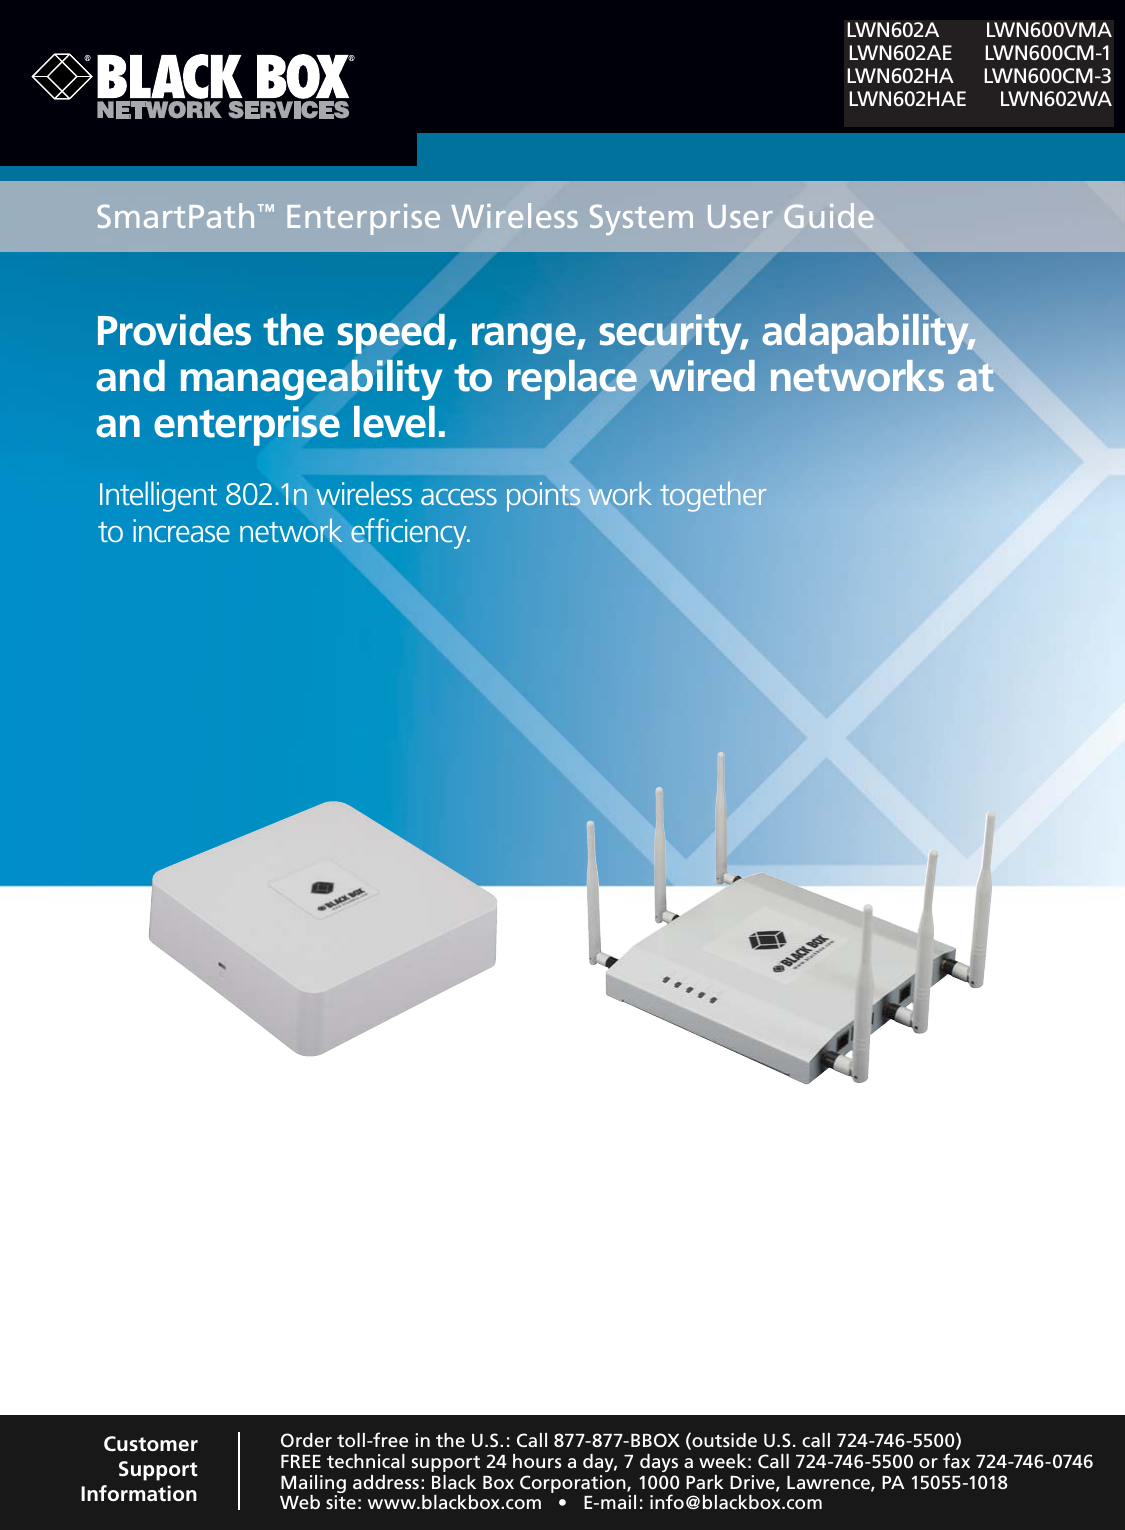 Provides the speed, range, security, adapability, and manageability to replace wired networks at an enterprise level.Intelligent 802.1n wireless access points work together  to increase network efficiency.SmartPath™ Enterprise Wireless System User GuideLWN602A LWN600VMA LWN602AE LWN600CM-1LWN602HA LWN600CM-3 LWN602HAE LWN602WAOrder toll-free in the U.S.: Call 877-877-BBOX (outside U.S. call 724-746-5500)FREE technical support 24 hours a day, 7 days a week: Call 724-746-5500 or fax 724-746-0746Mailing address: Black Box Corporation, 1000 Park Drive, Lawrence, PA 15055-10187EBSITEWWWBLACKBOXCOMs%MAILINFO BLACKBOXCOMCustomer Support Information